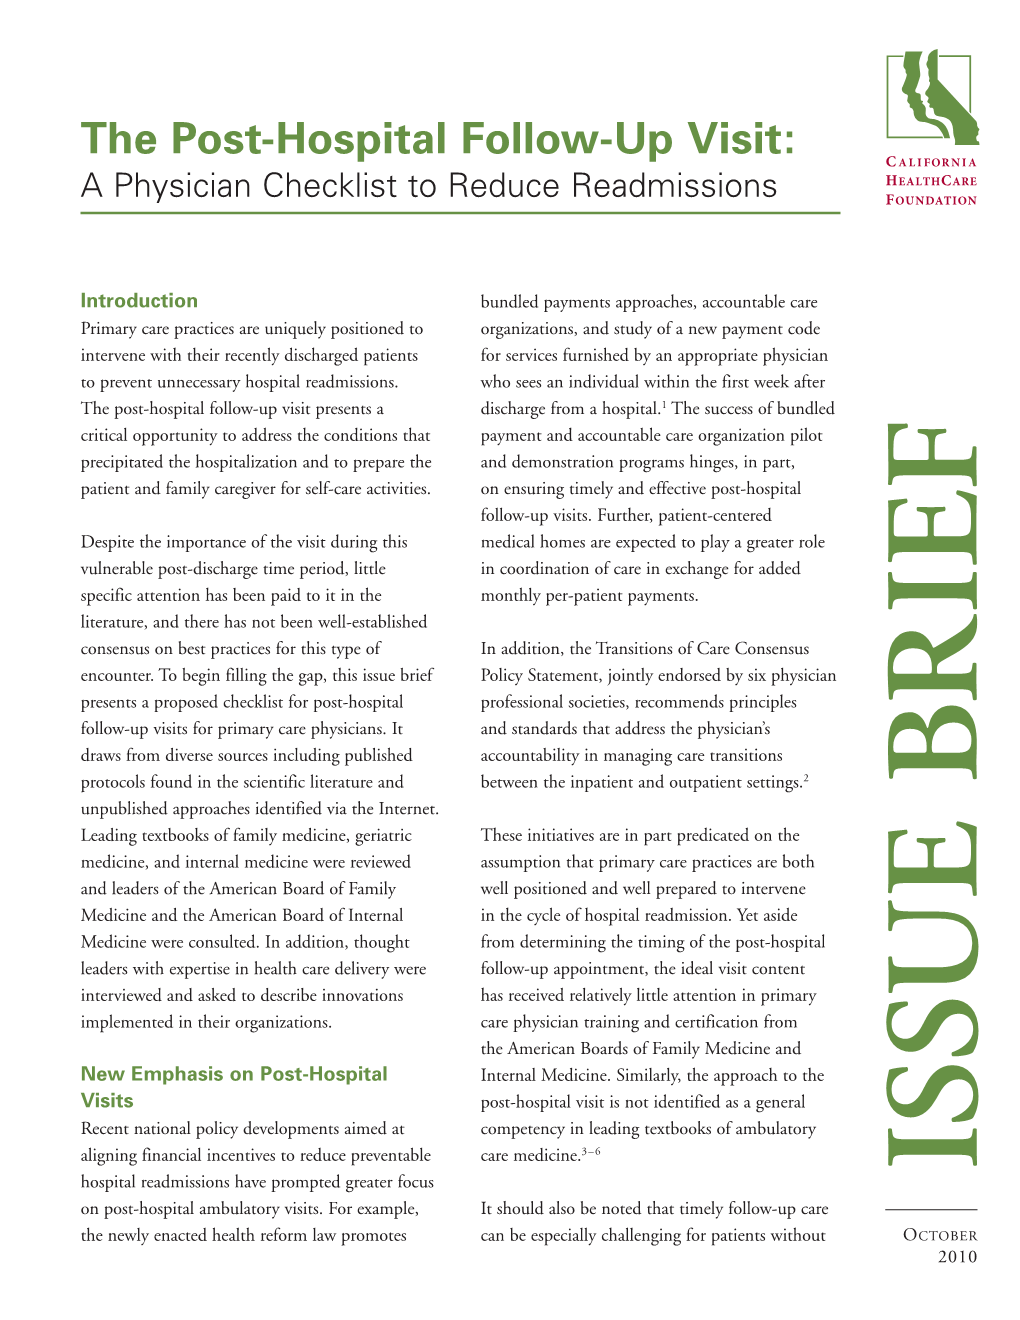 The Post-Hospital Follow-Up Visit: a Physician Checklist to Reduce